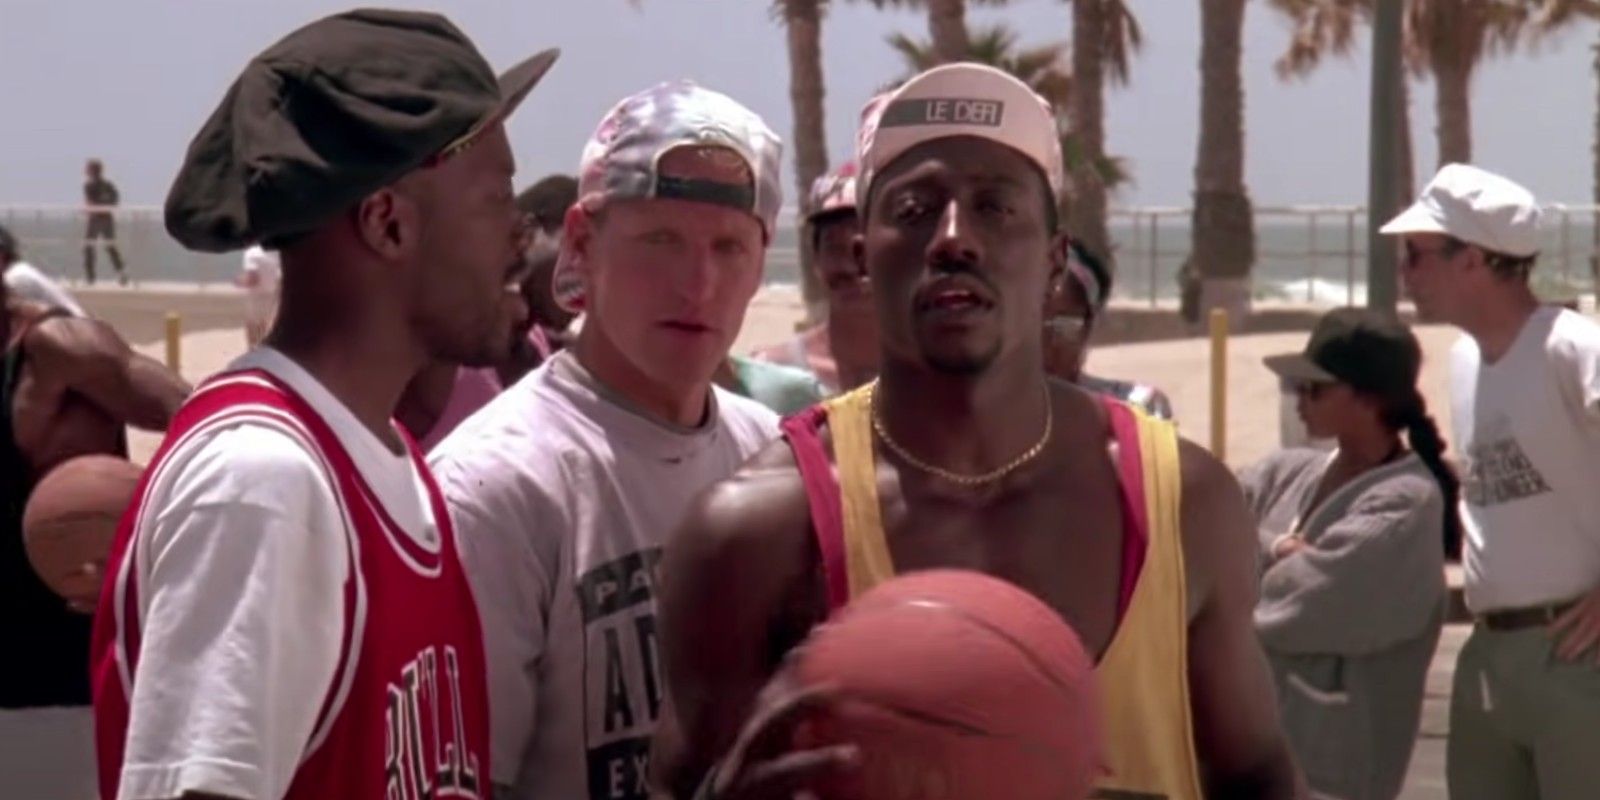 The Best Basketball Movies to Watch Between March Madness Games